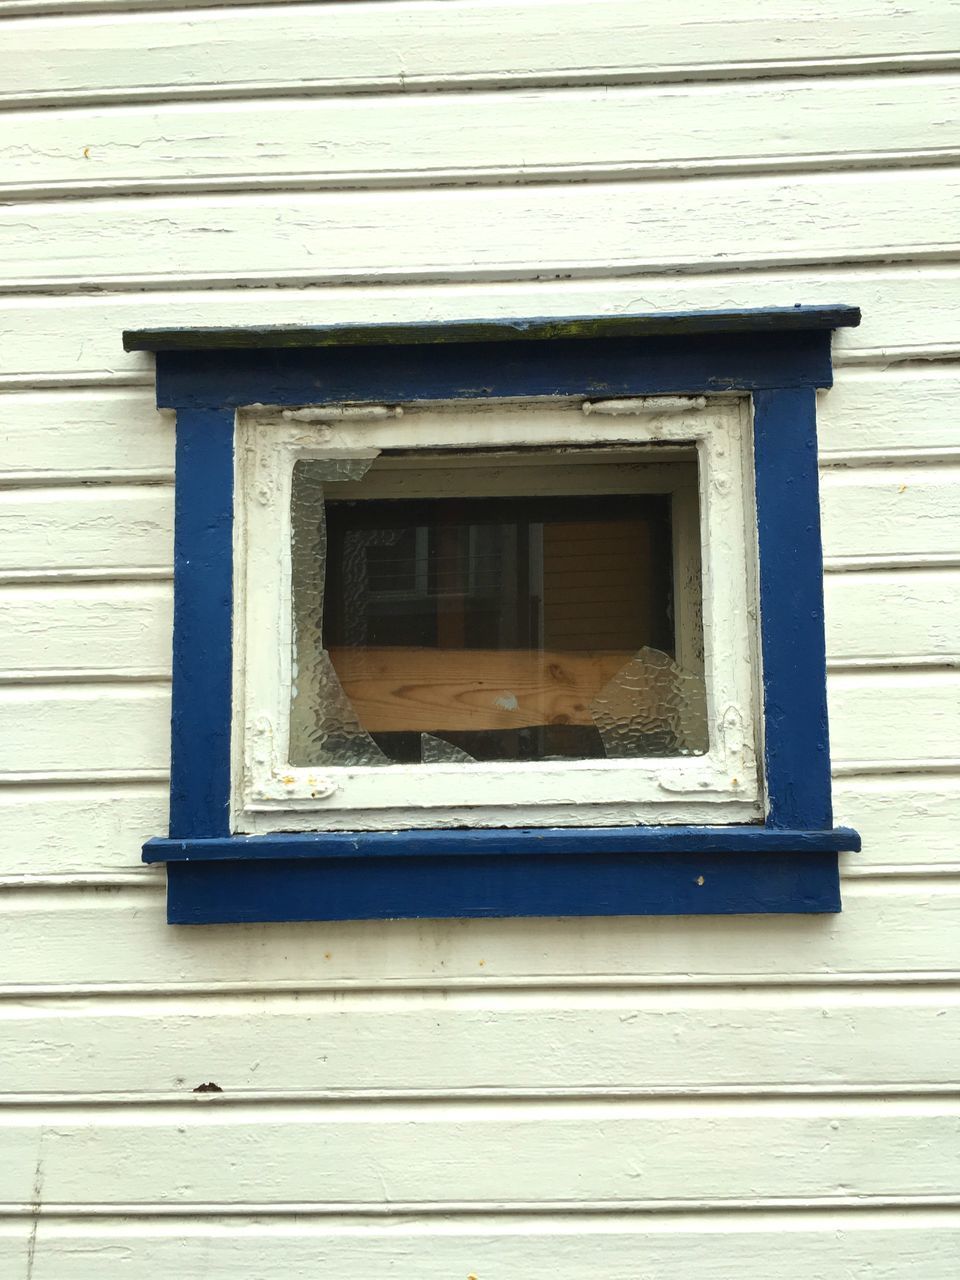 CLOSE-UP OF WINDOW ON OLD BUILDING